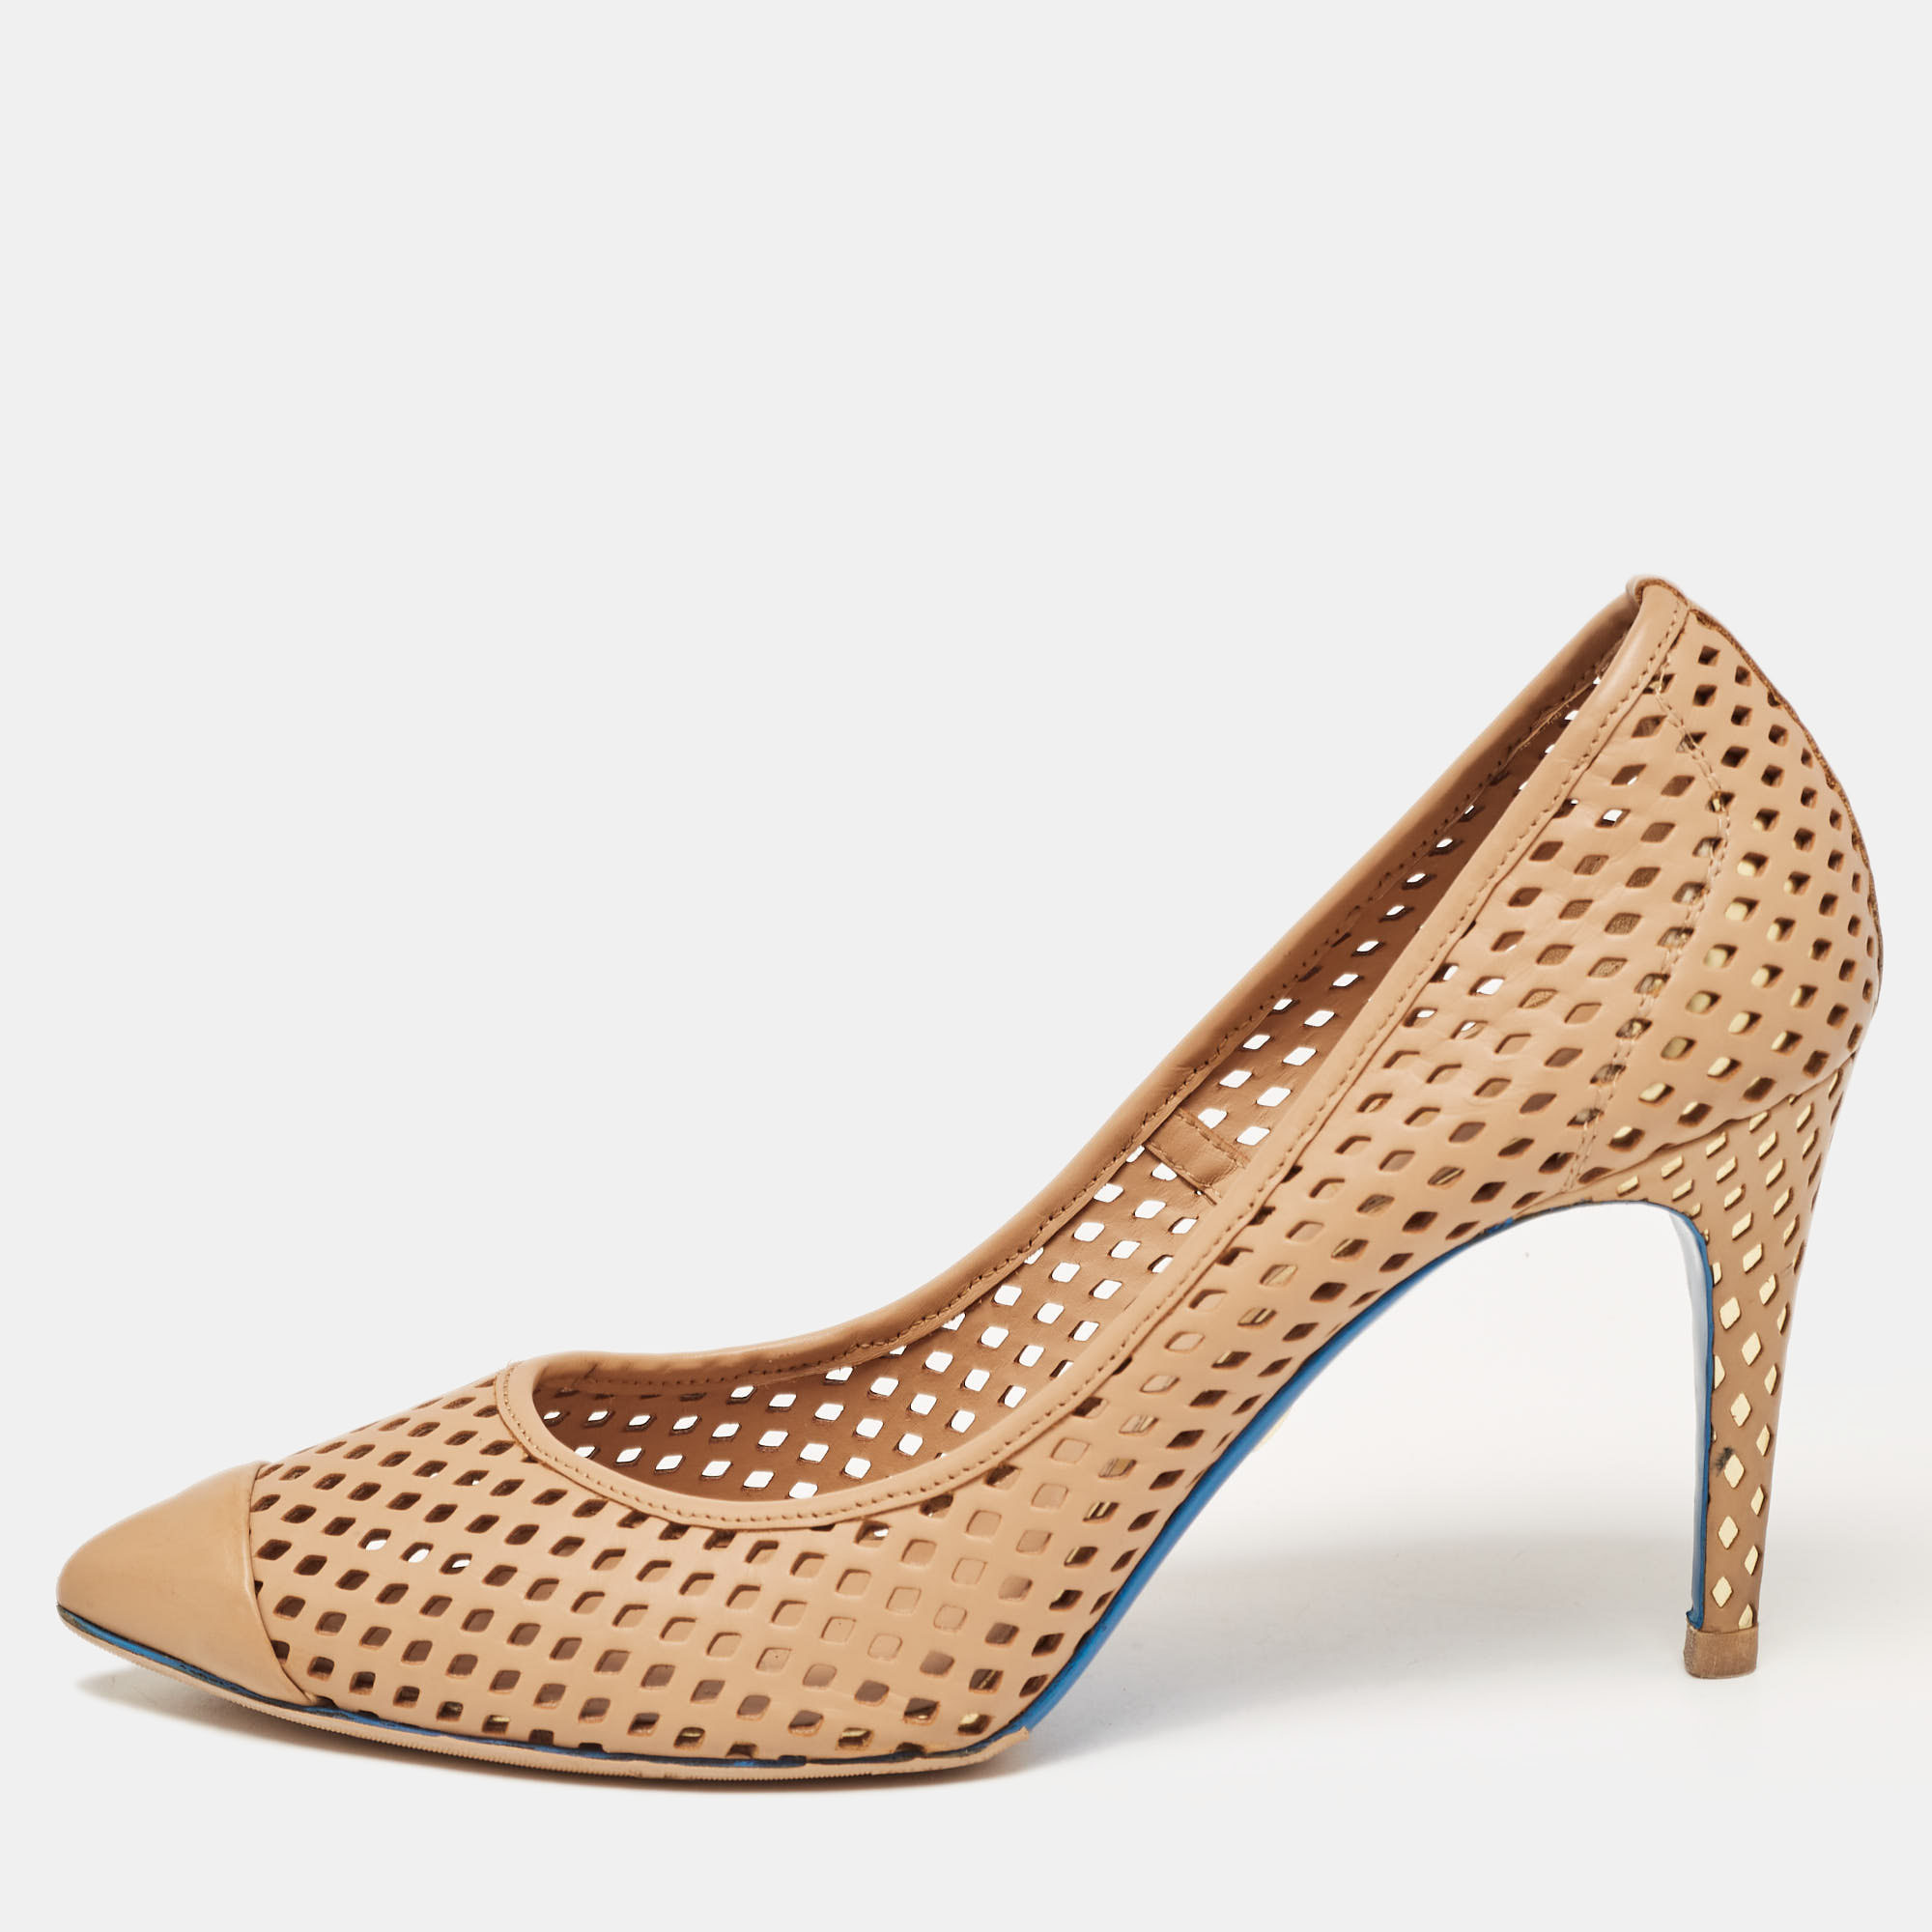 Loriblu Beige Perforated Leather Pointed Toe Pumps Size 40